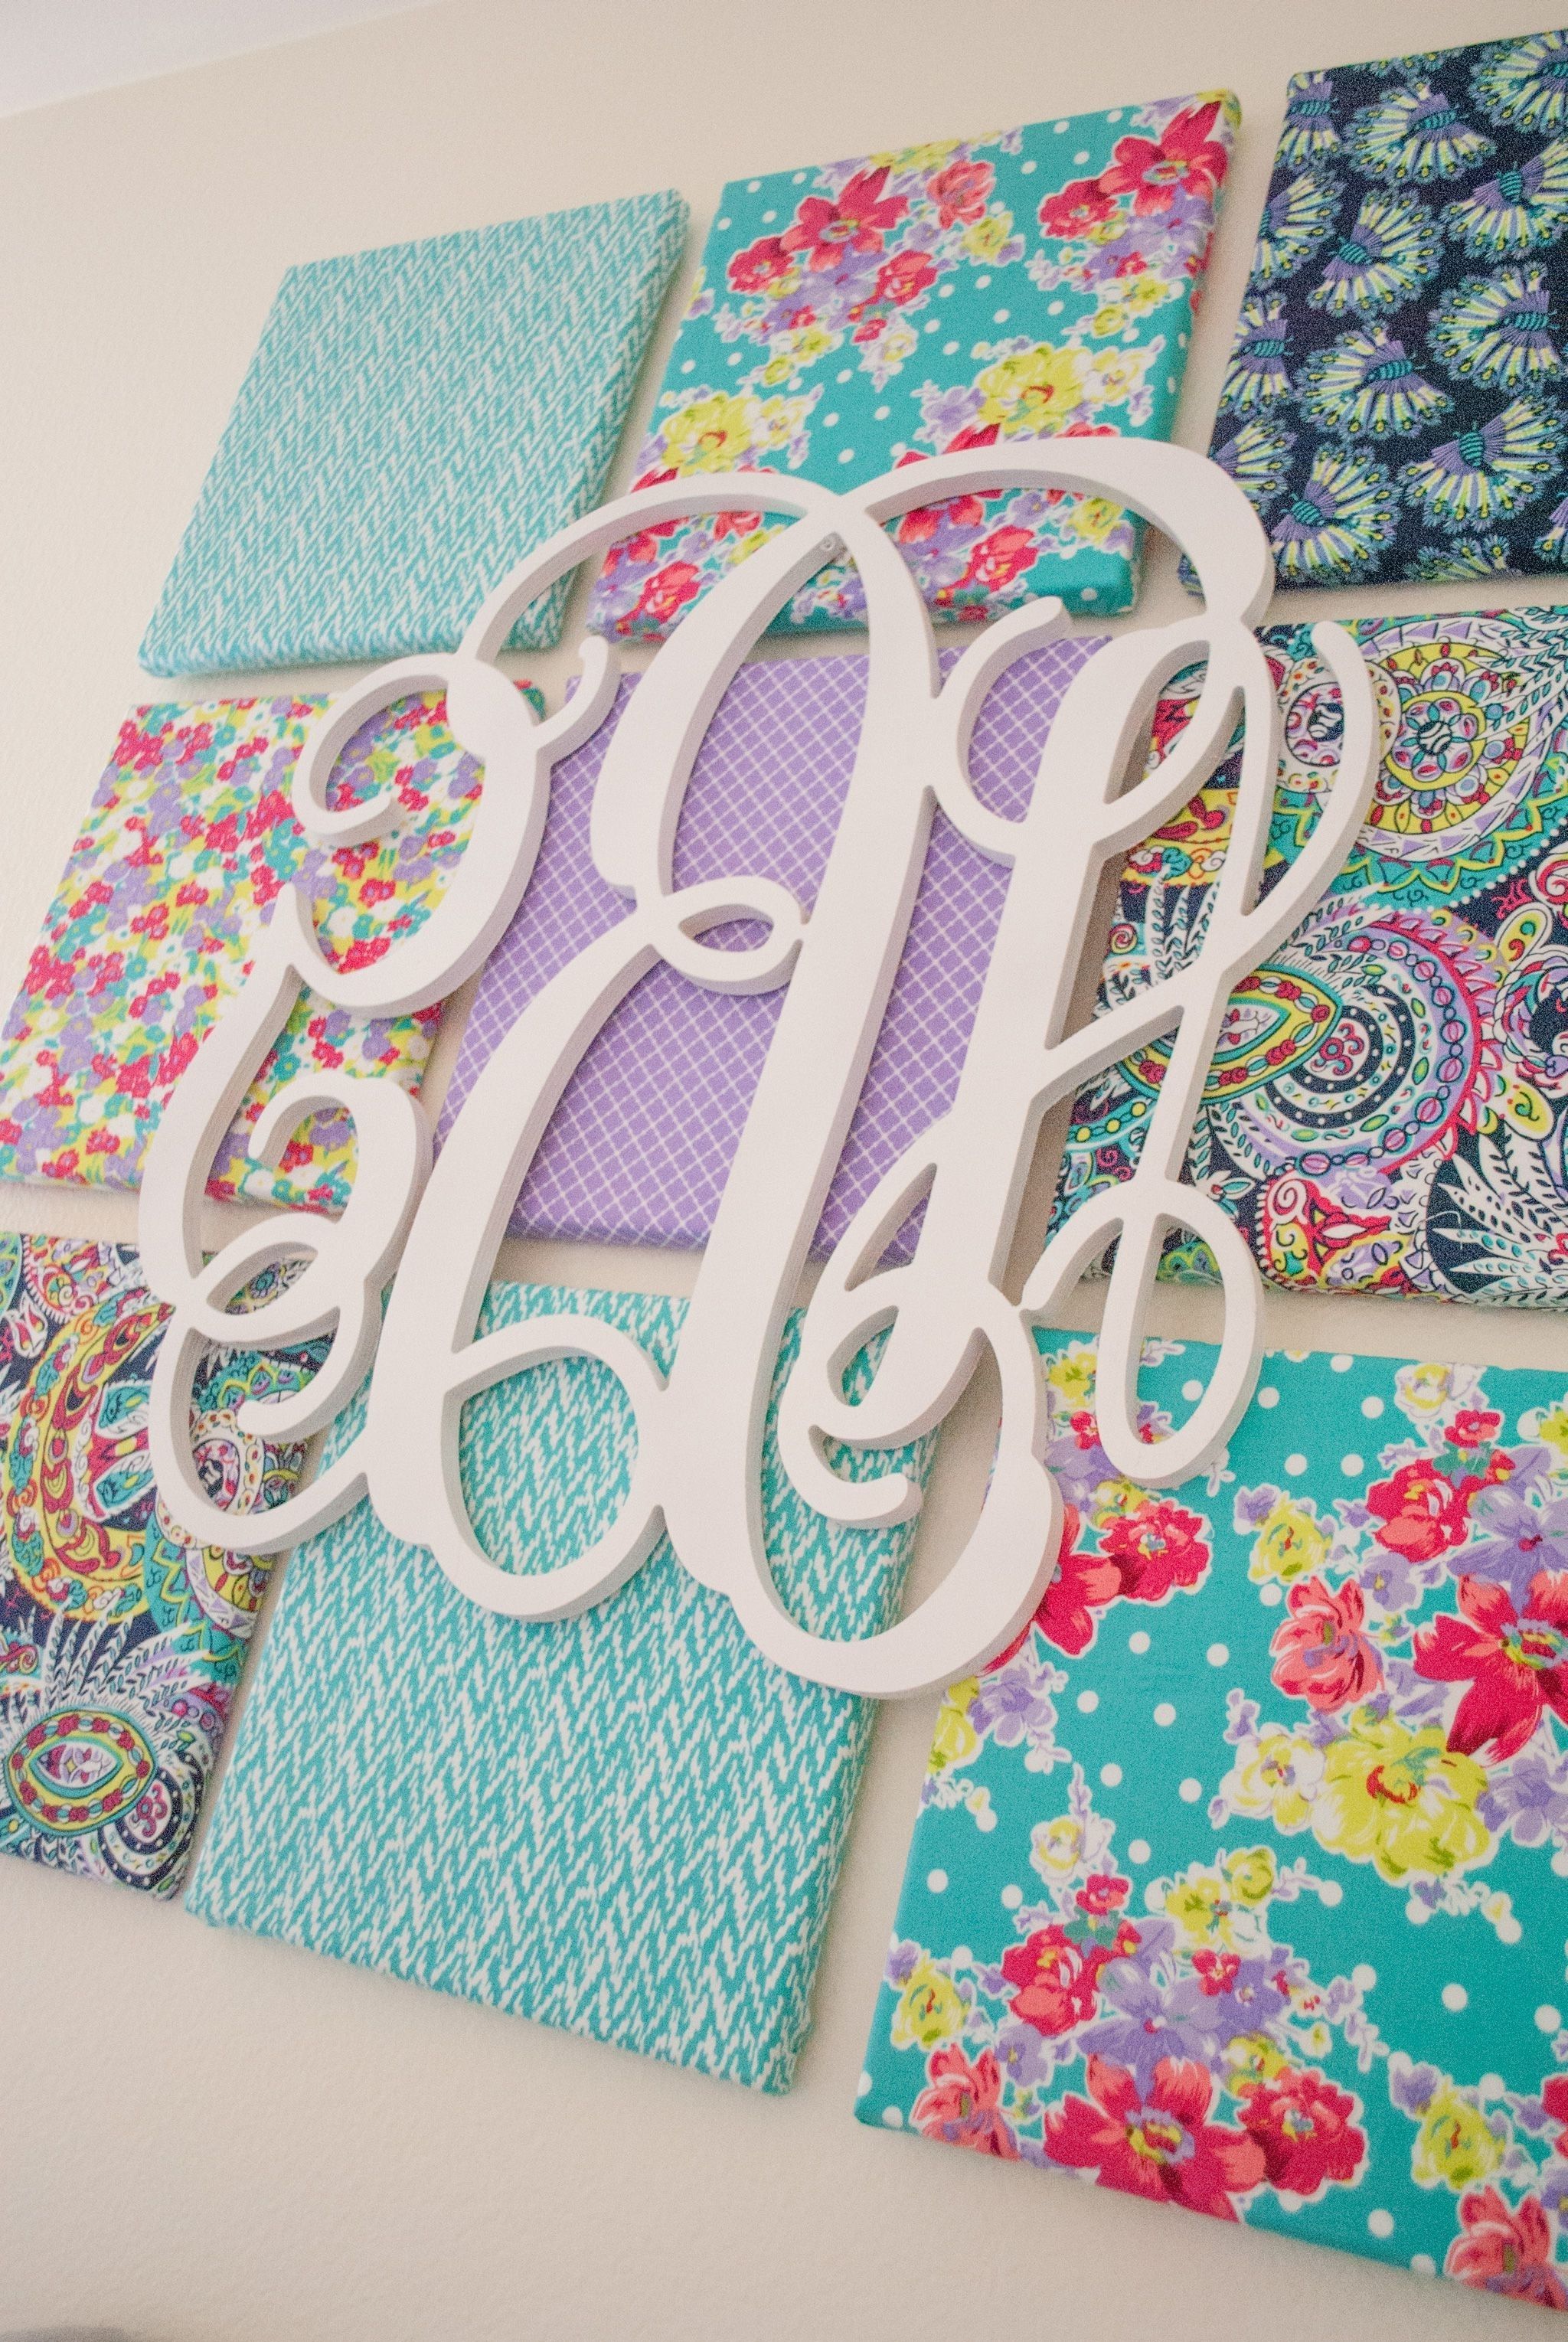 Monogram Wall, Kids Rooms And Monograms (View 13 of 15)